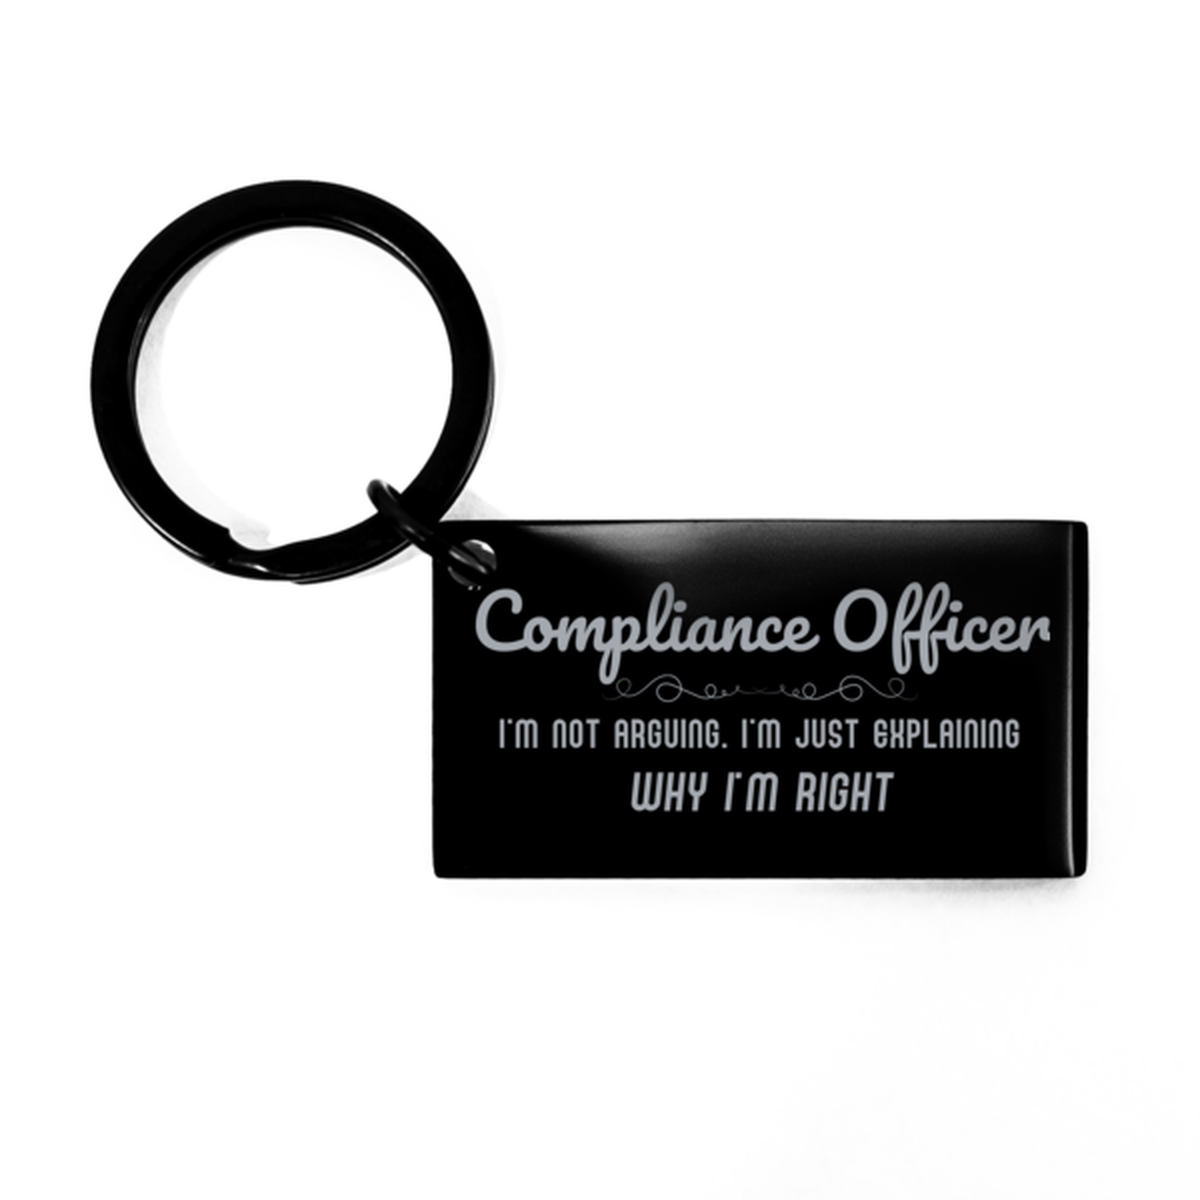 Compliance Officer I'm not Arguing. I'm Just Explaining Why I'm RIGHT Keychain, Funny Saying Quote Compliance Officer Gifts For Compliance Officer Graduation Birthday Christmas Gifts for Men Women Coworker